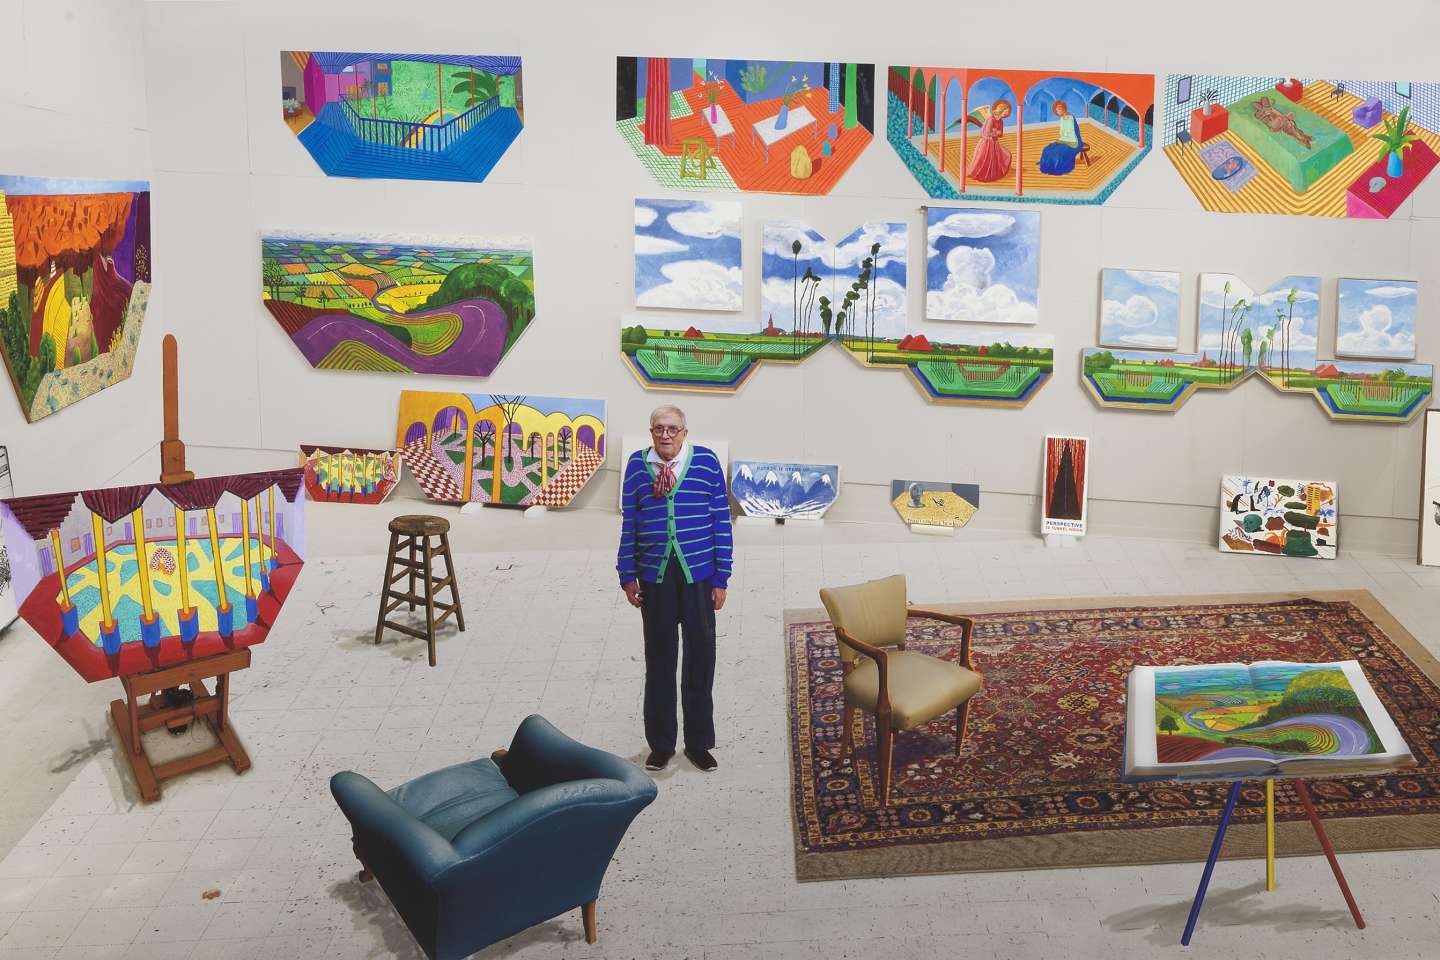 David Hockney and his intimate allusions at the Granet Museum in Aix-en-Provence